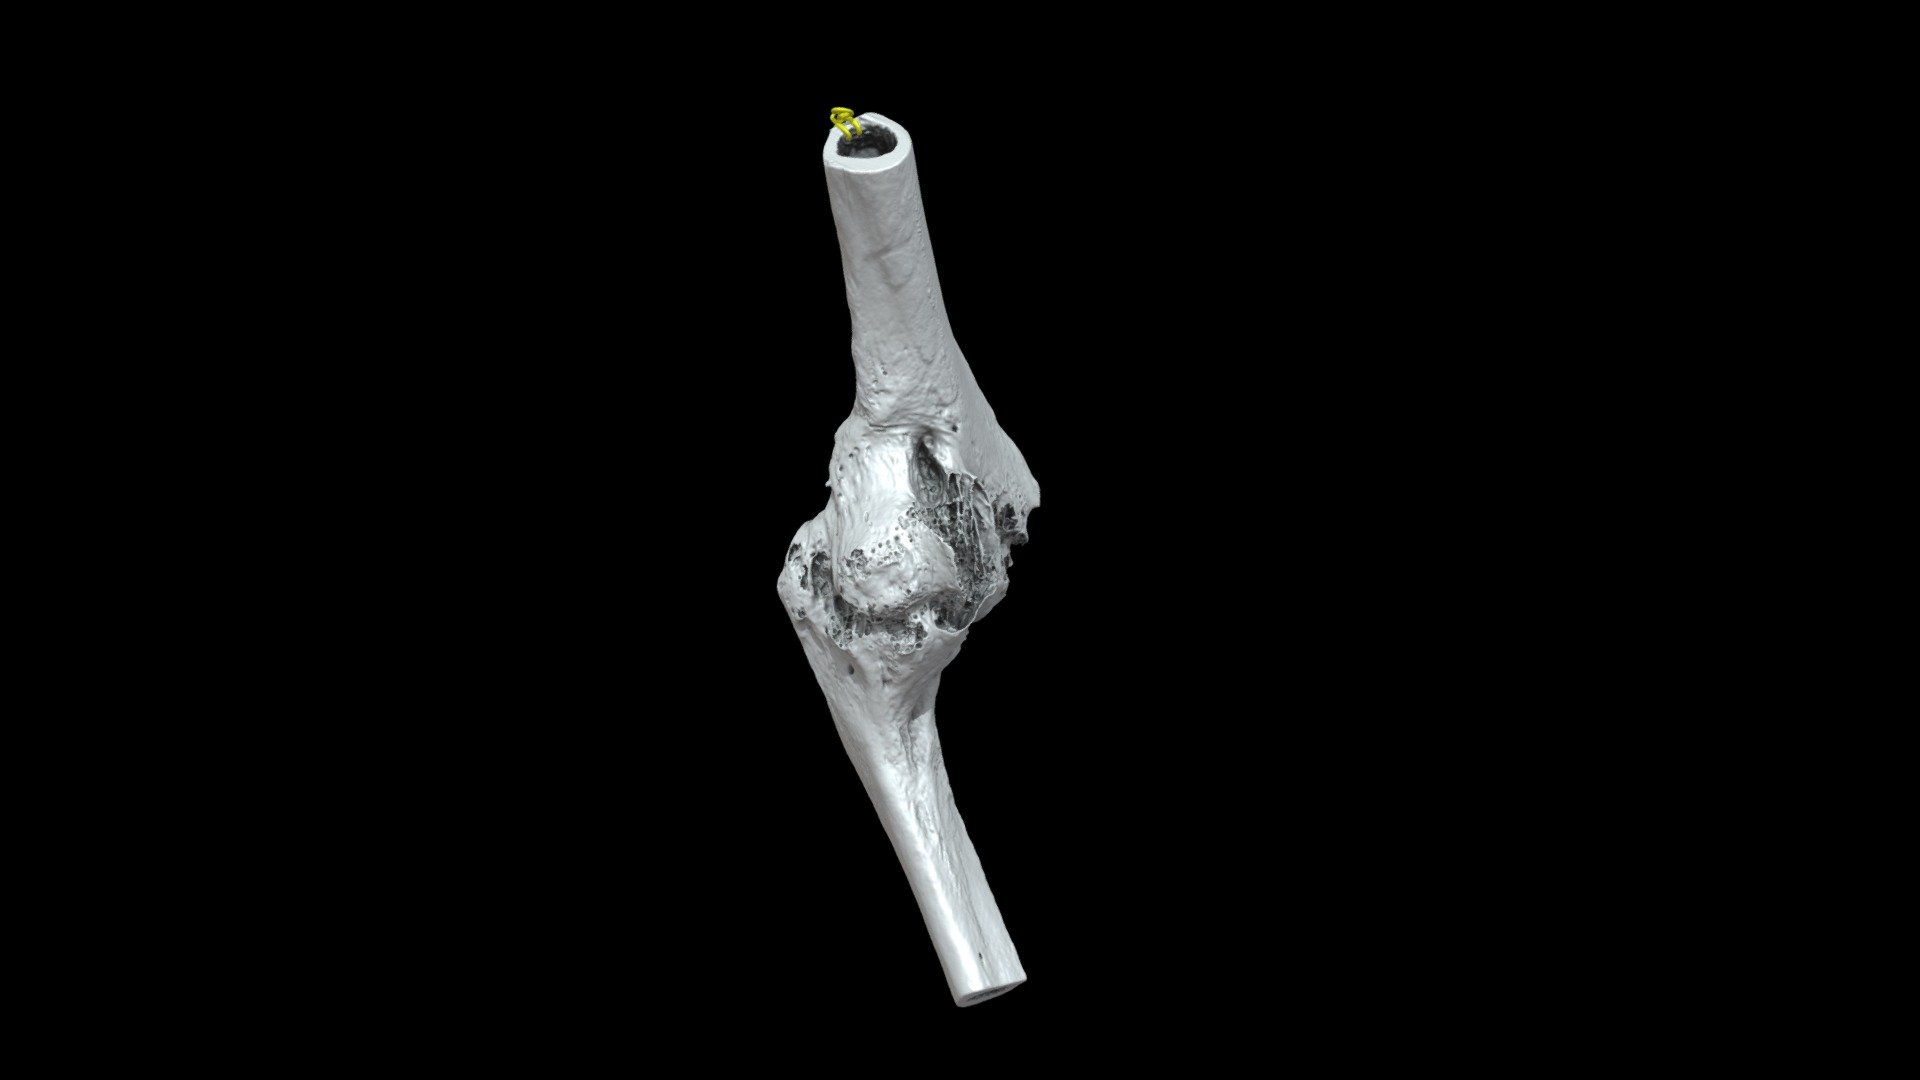 Left elbow (distal humerus and proximal ulna) with traumatic ankylosis from the American Civil War, collected by John Gouley. Specimen AFIP 1002831 from the National Museum of Health and Medicine (Silver Spring, MD).

Model generated with the Segment Editor in 3D Slicer from a micro-computed tomography scan. 3D models can be downloaded from Morphosource at: https://www.morphosource.org/Detail/SpecimenDetail/Show/specimen_id/26332. 

Model generated by Terrie Simmons-Ehrhardt 3d model